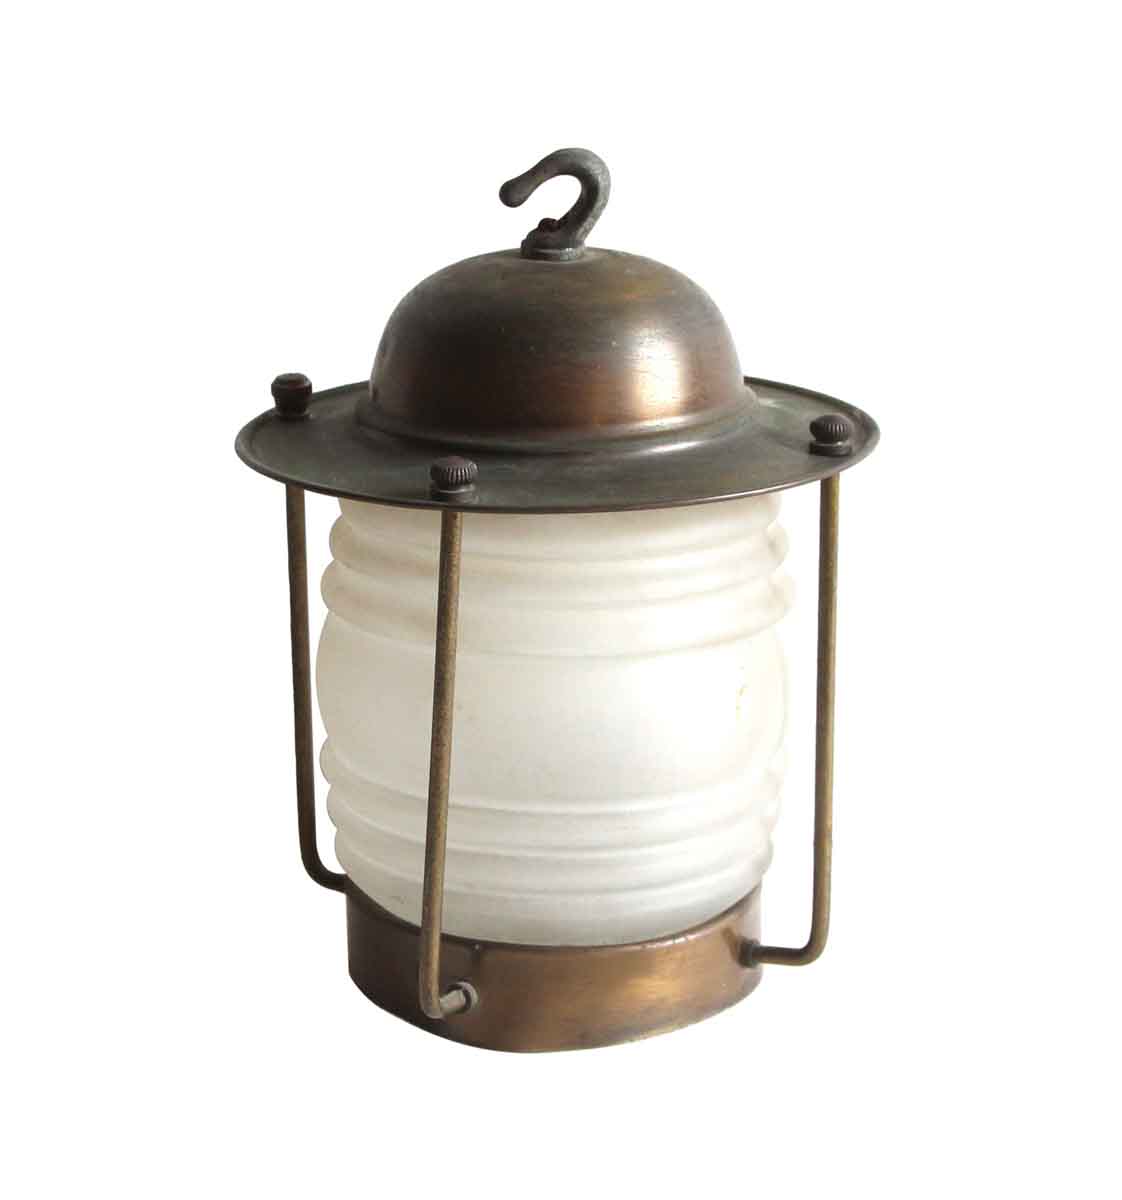 https://ogtstore.com/wp-content/uploads/2020/10/wall-ceiling-lanterns-antique-traditional-mini-brass-frosted-glass-ceiling-lantern-p260288.jpg